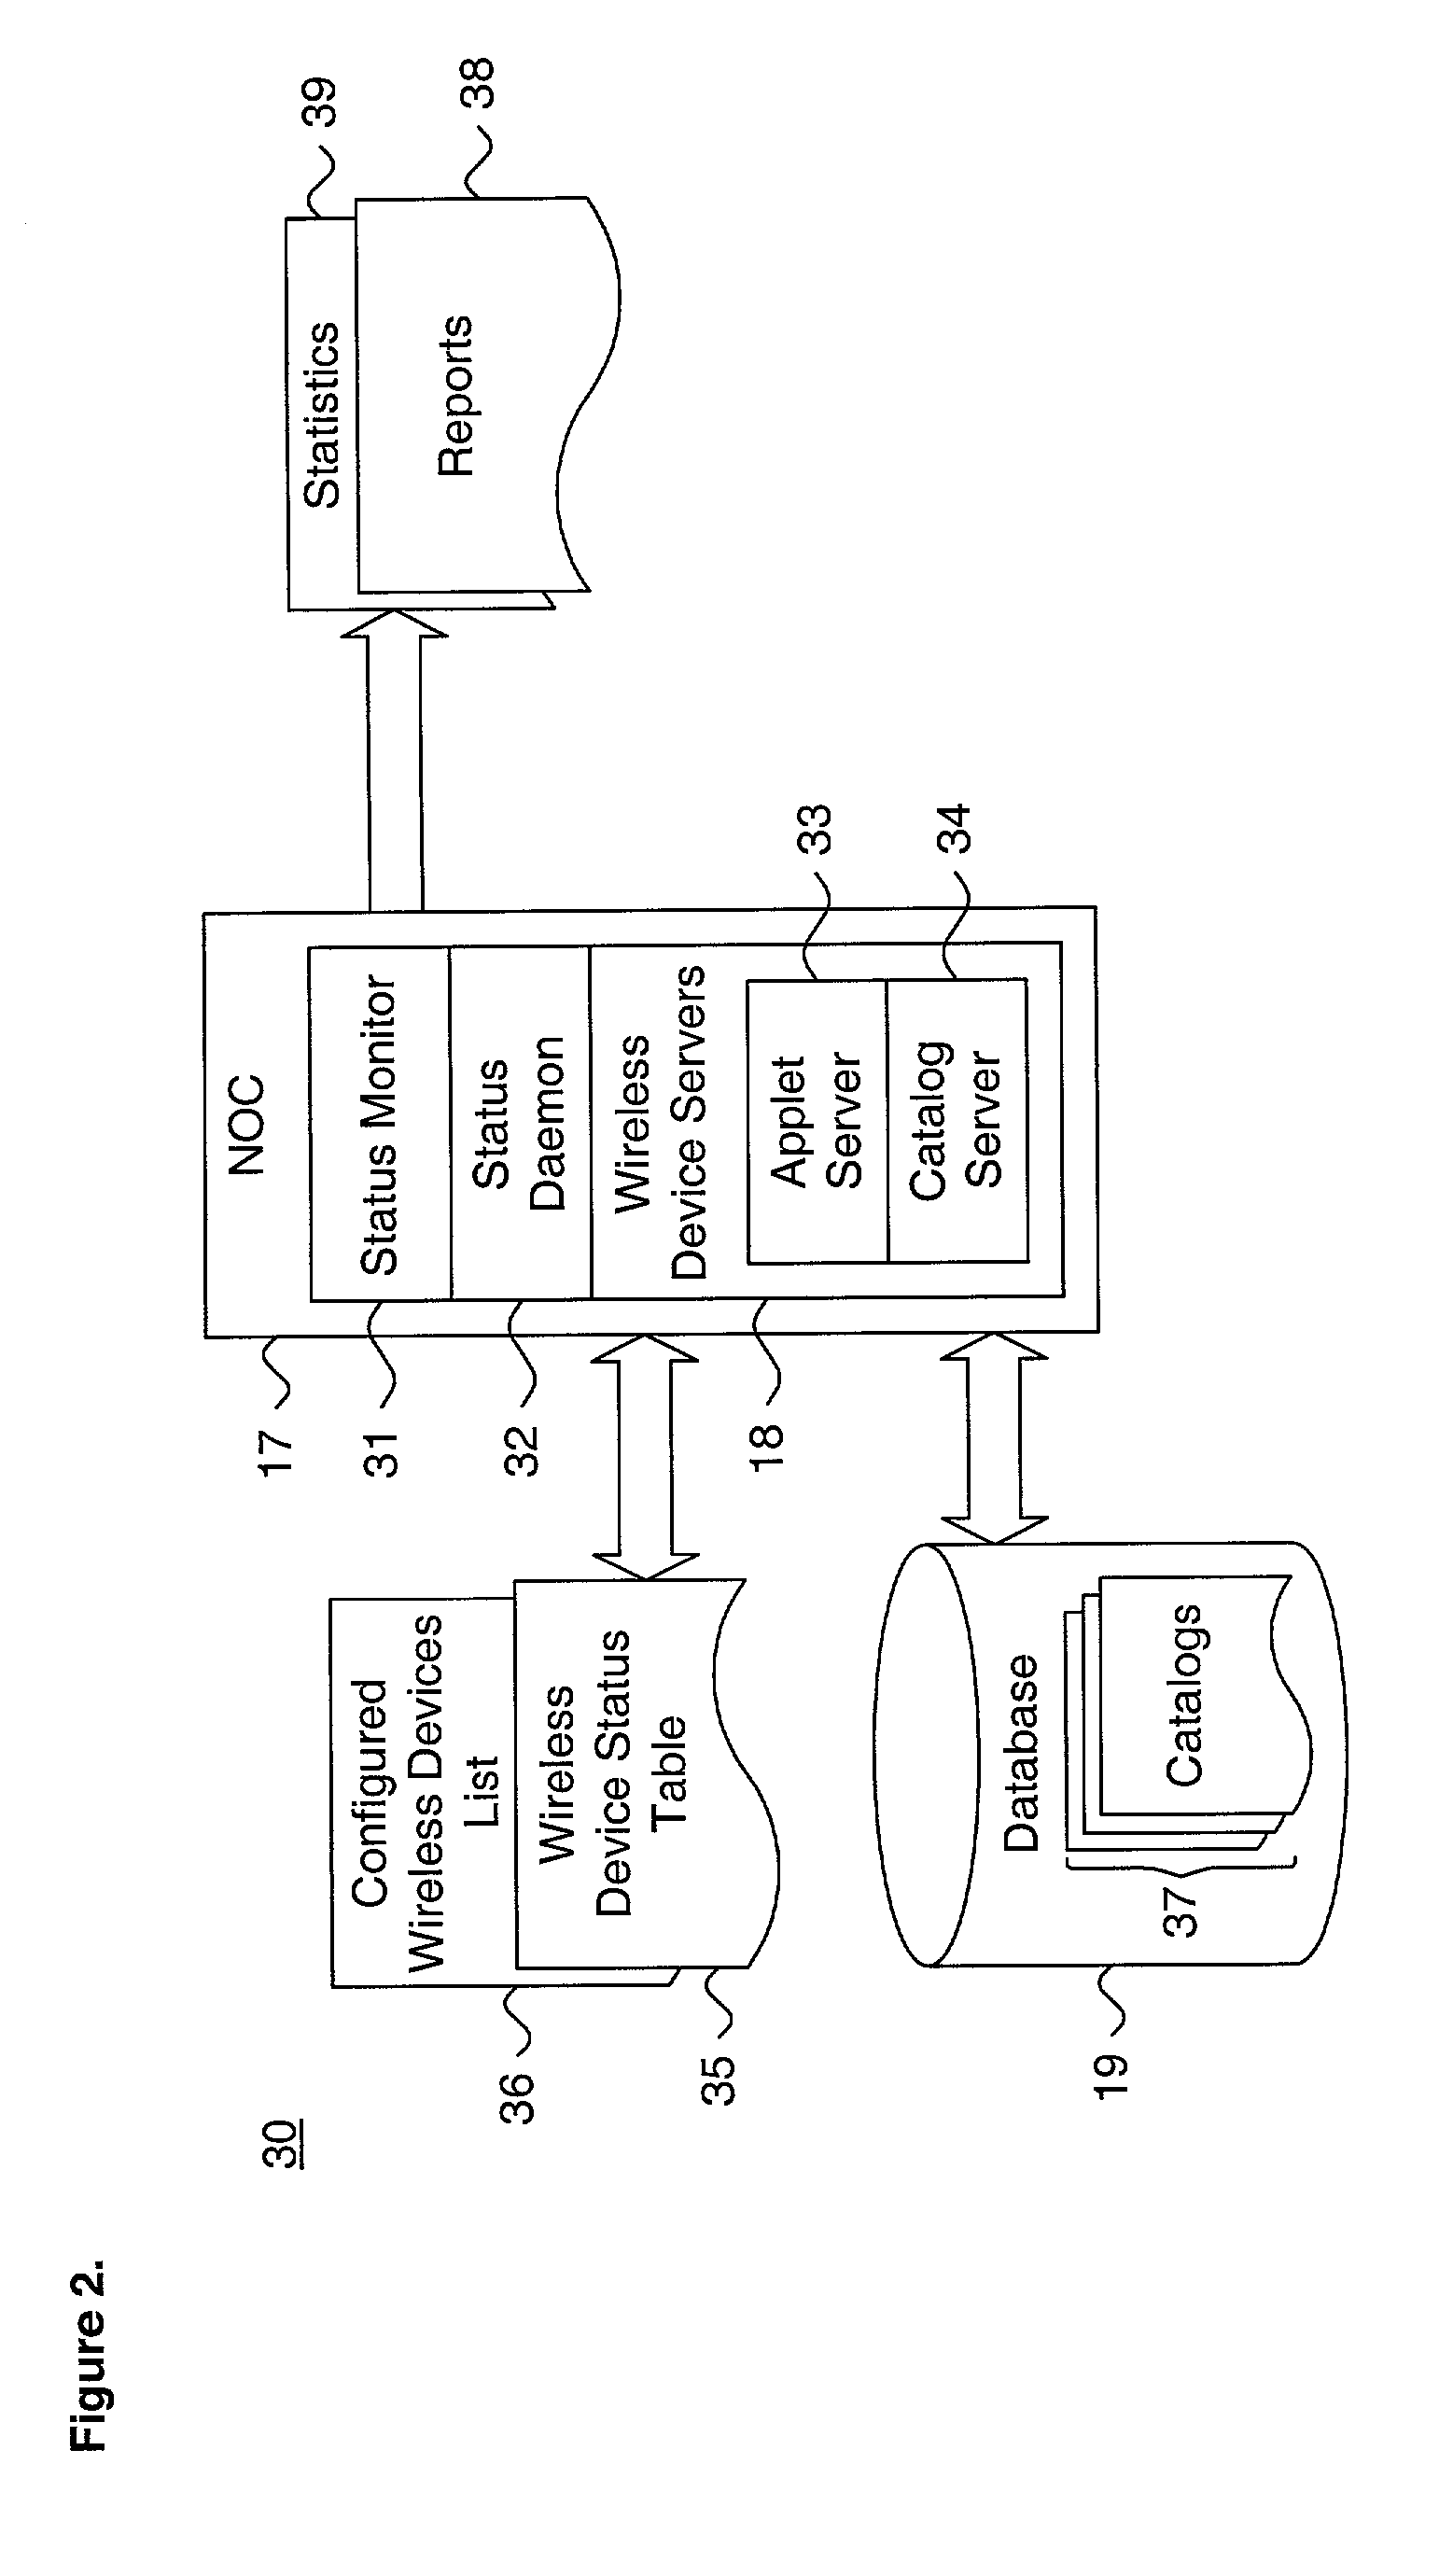 System and method for providing telephonic content security service in a wireless network environment